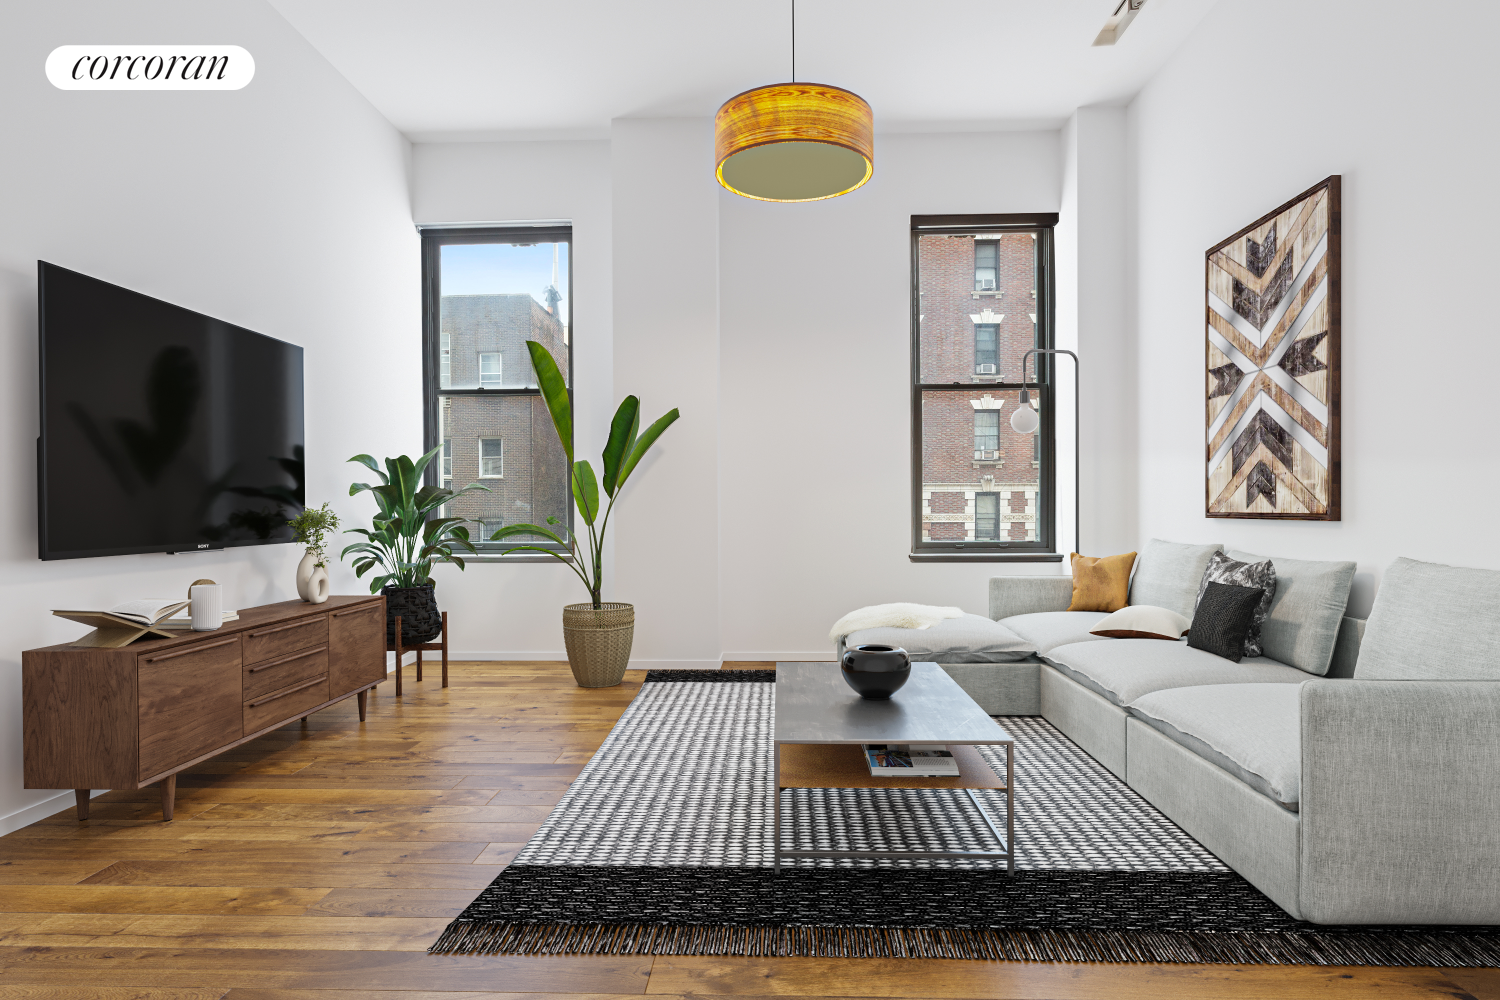 305 2nd Avenue 318, Gramercy Park, Downtown, NYC - 2 Bedrooms  
2 Bathrooms  
6 Rooms - 